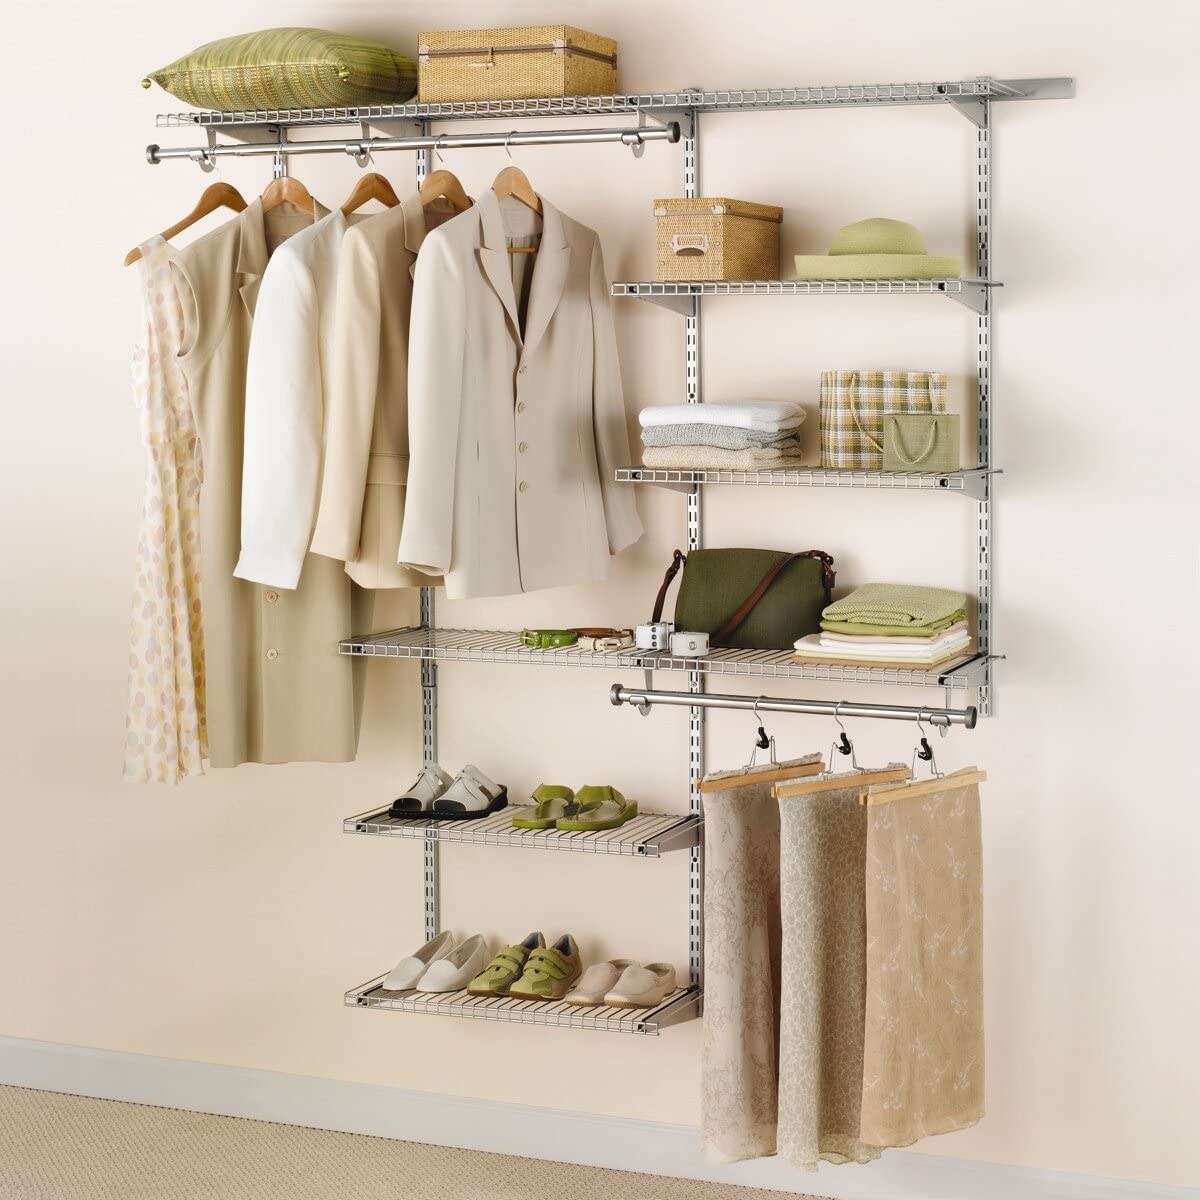 the closet kit with a rack holding hanging clothes and shelves holding accessories